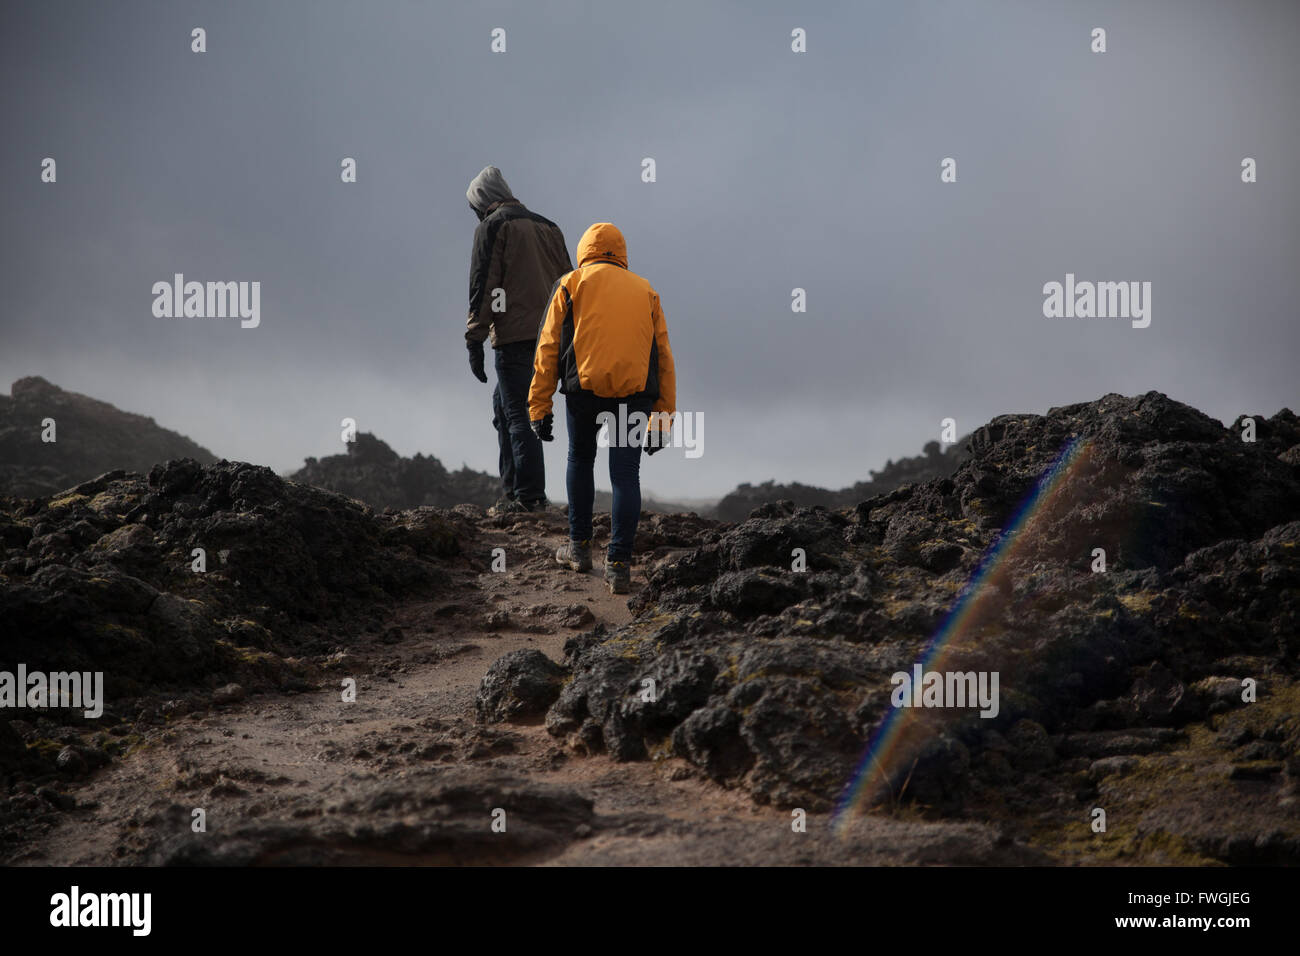 Full Length Rear View Of Tourist Walking On Arid Landscape Against Cloudy Sky Stock Photo